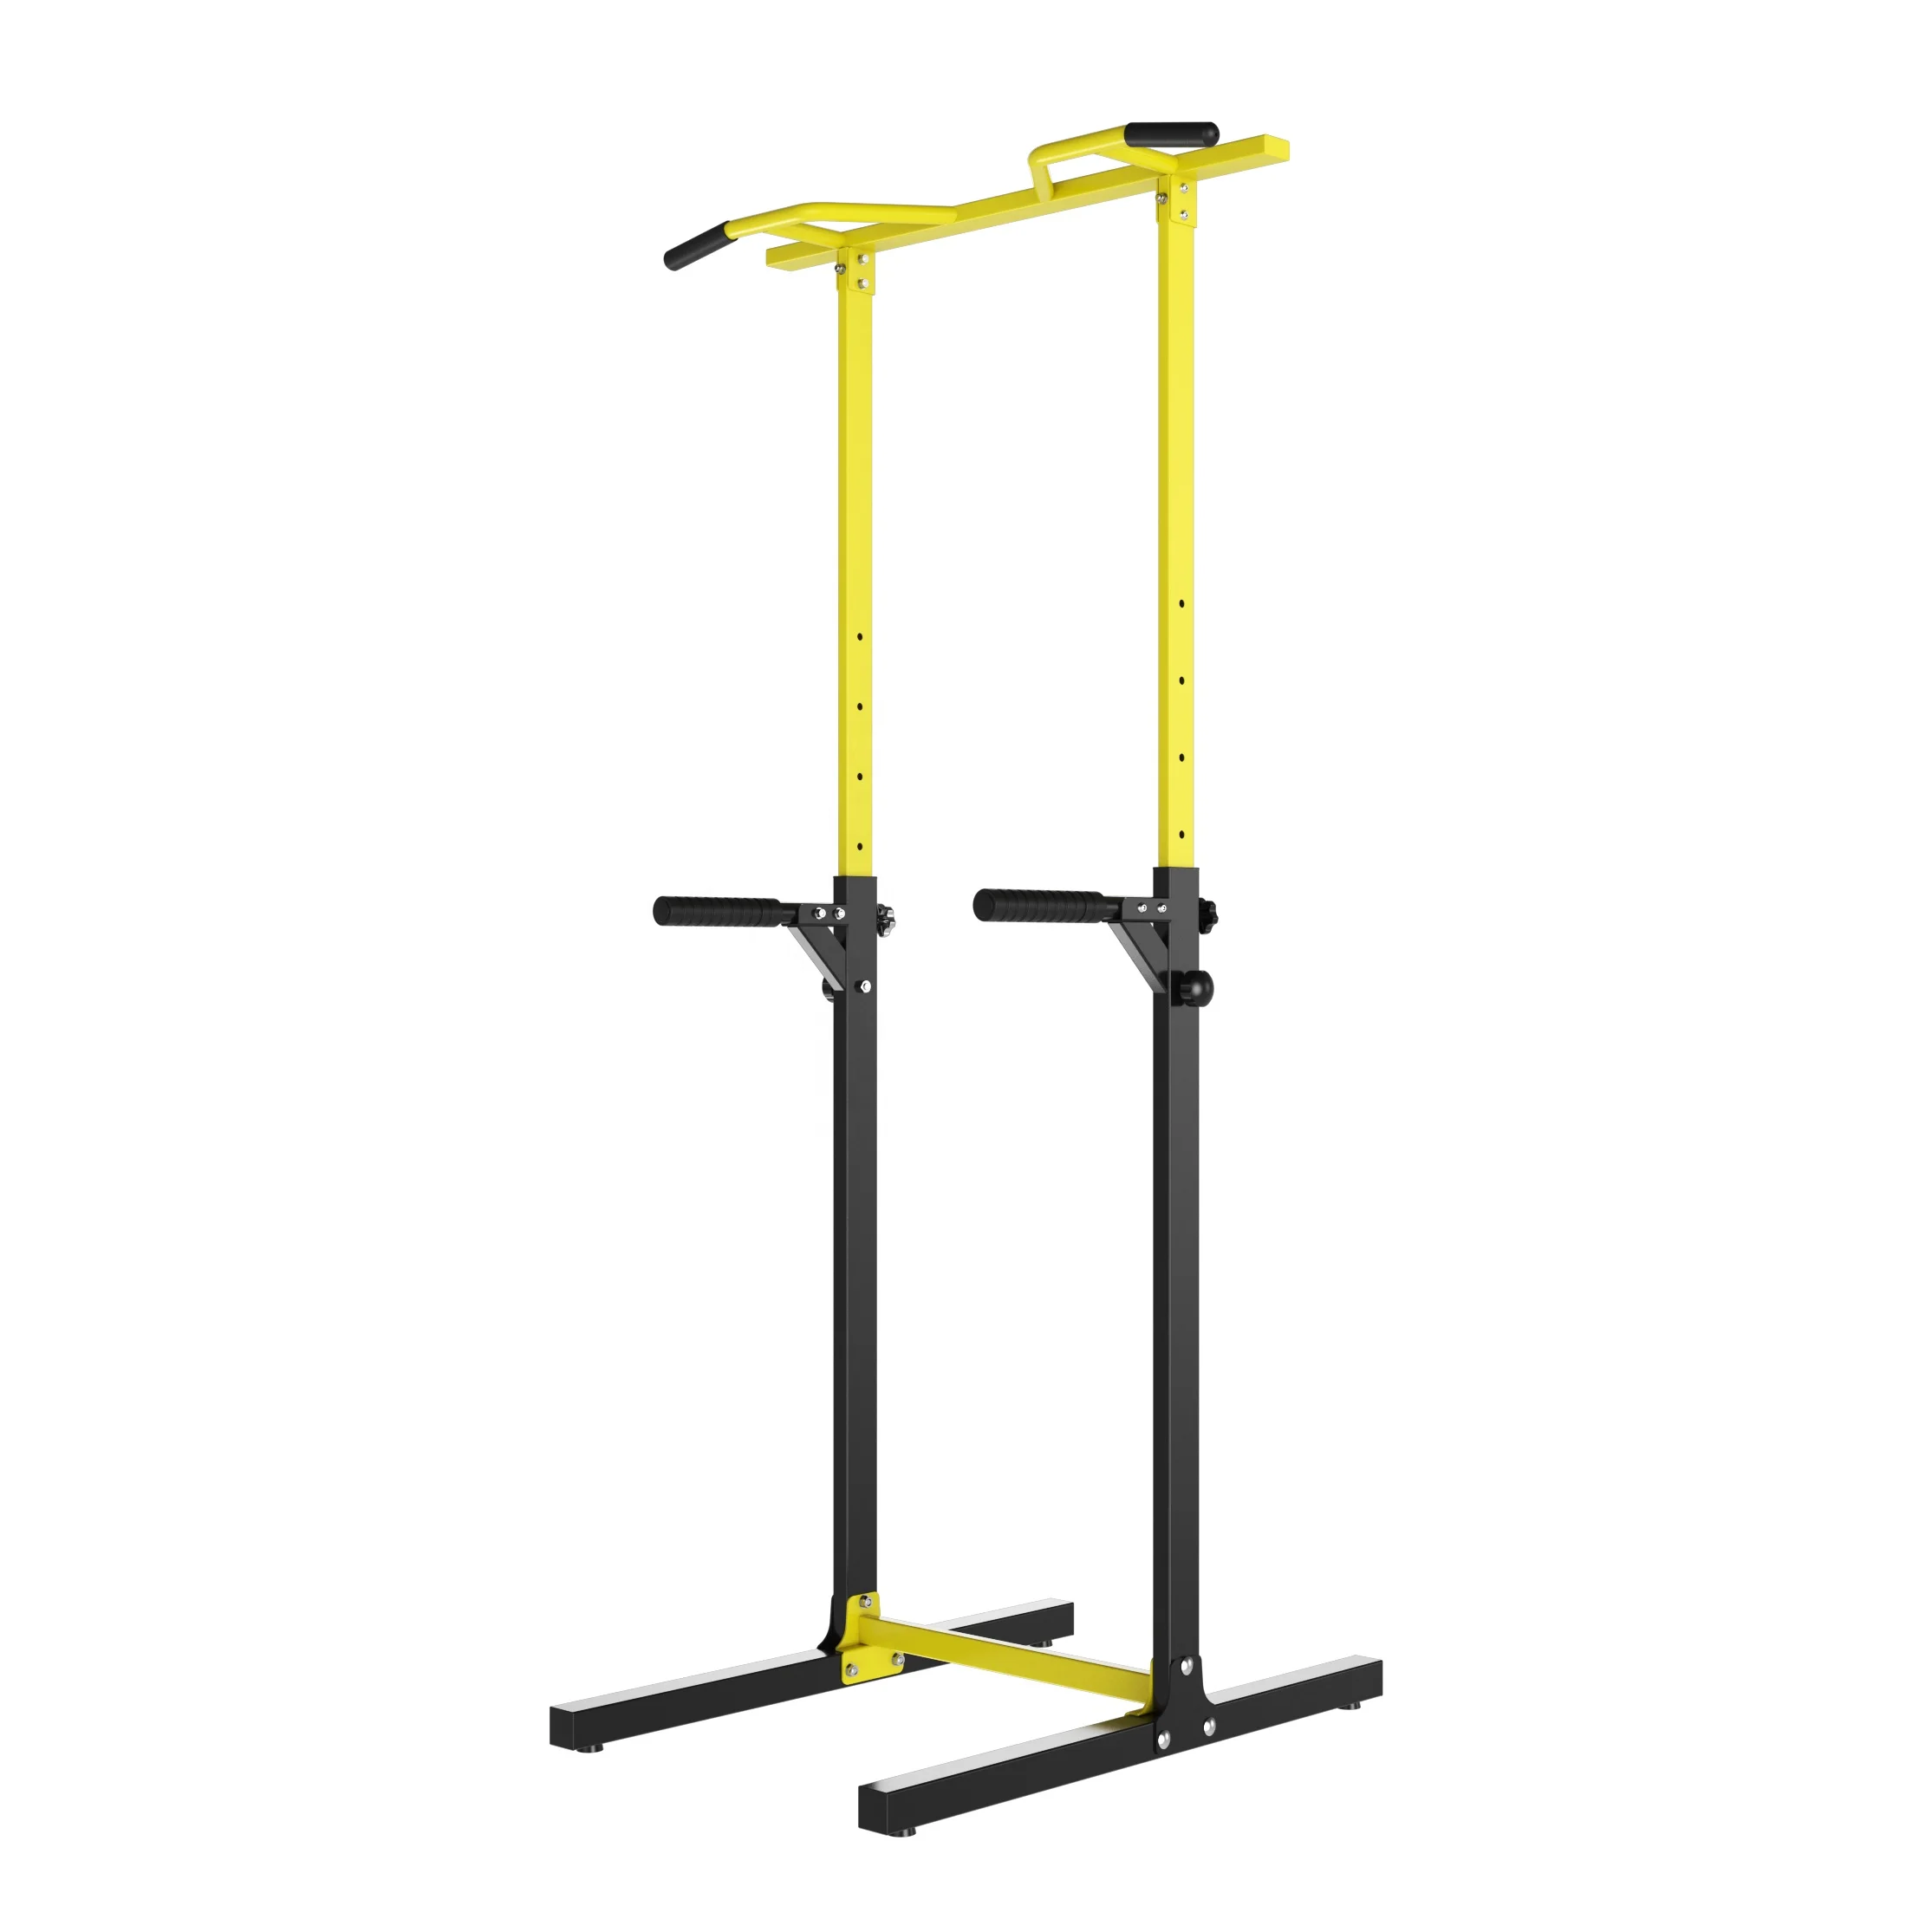 Buy Cheap Outdoor Perfect Home Gym Equipment Adjustable Dip Free ...